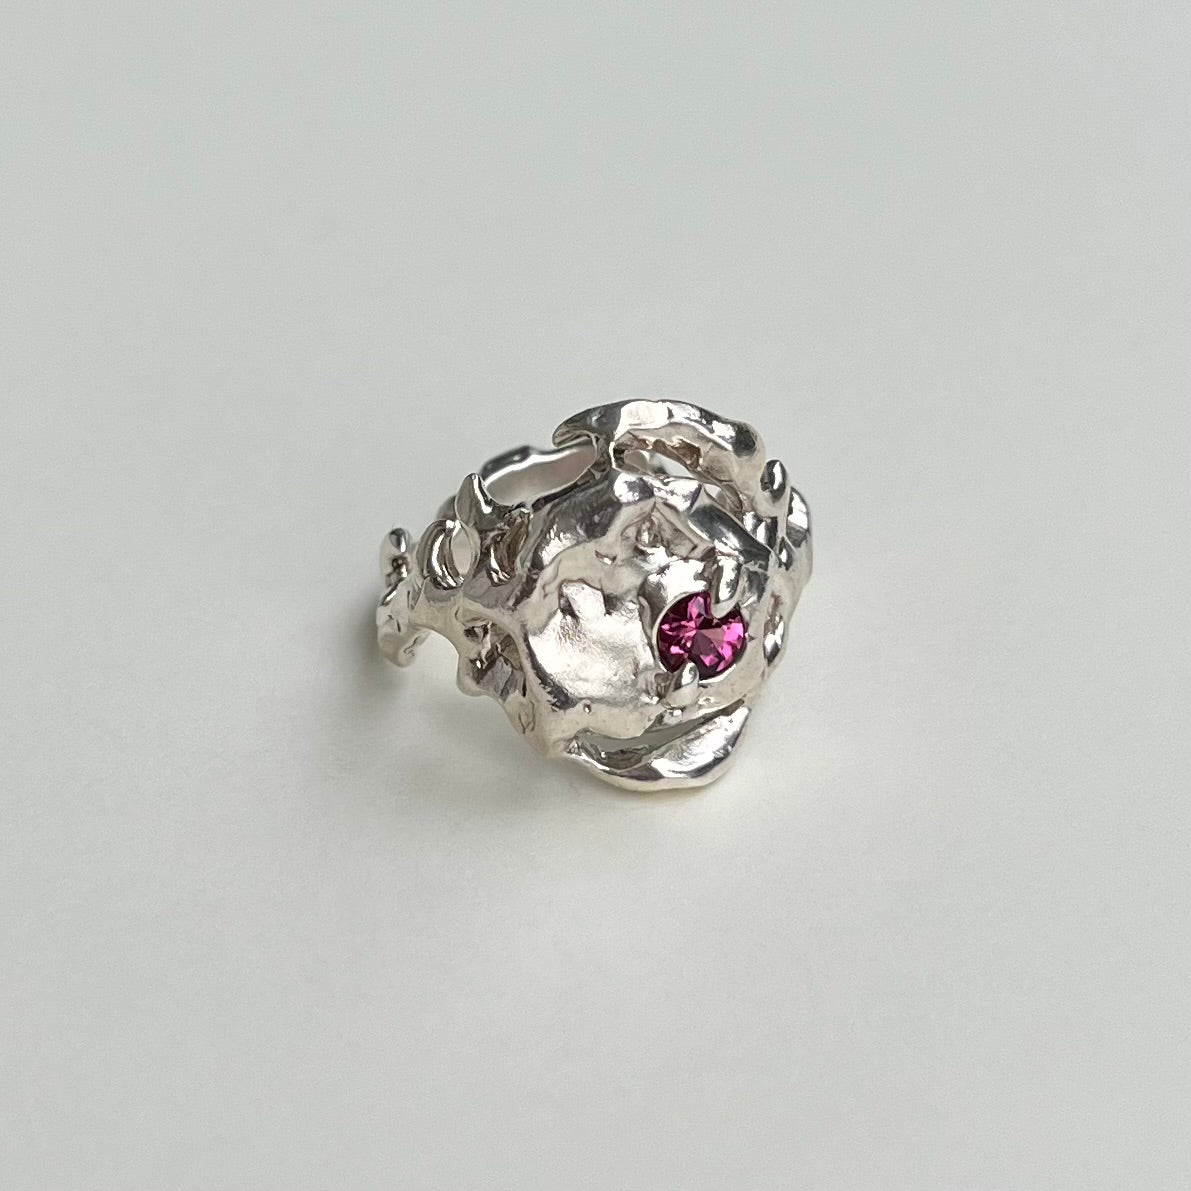 KHAOS sterling silver and pink Tourmaline chevaliere ring I